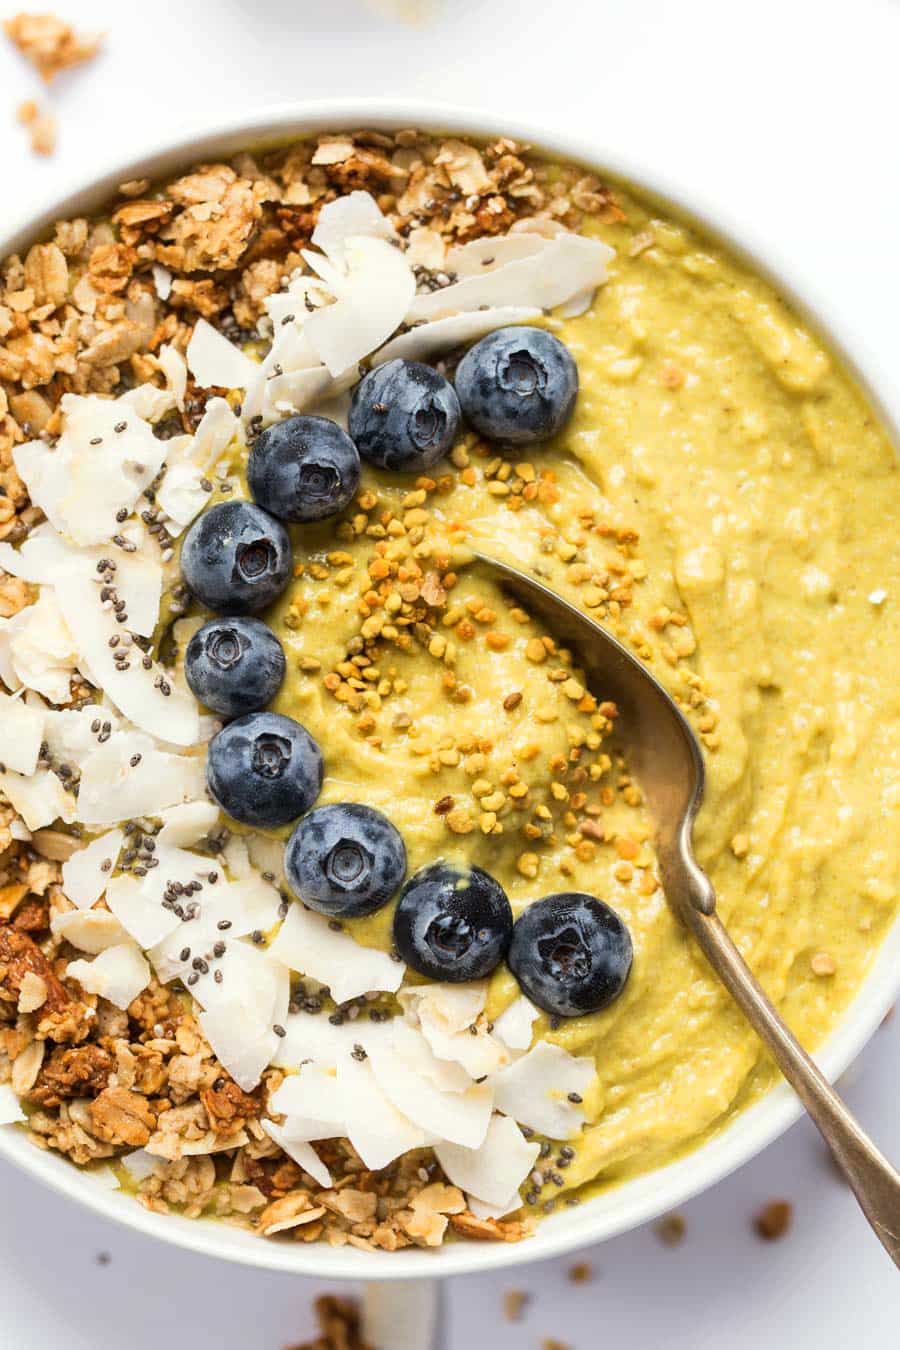 This ENERGIZING Mango Smoothie Bowl is made with fruits, veggies and superfoods to give you a natural boost of energy in the morning!